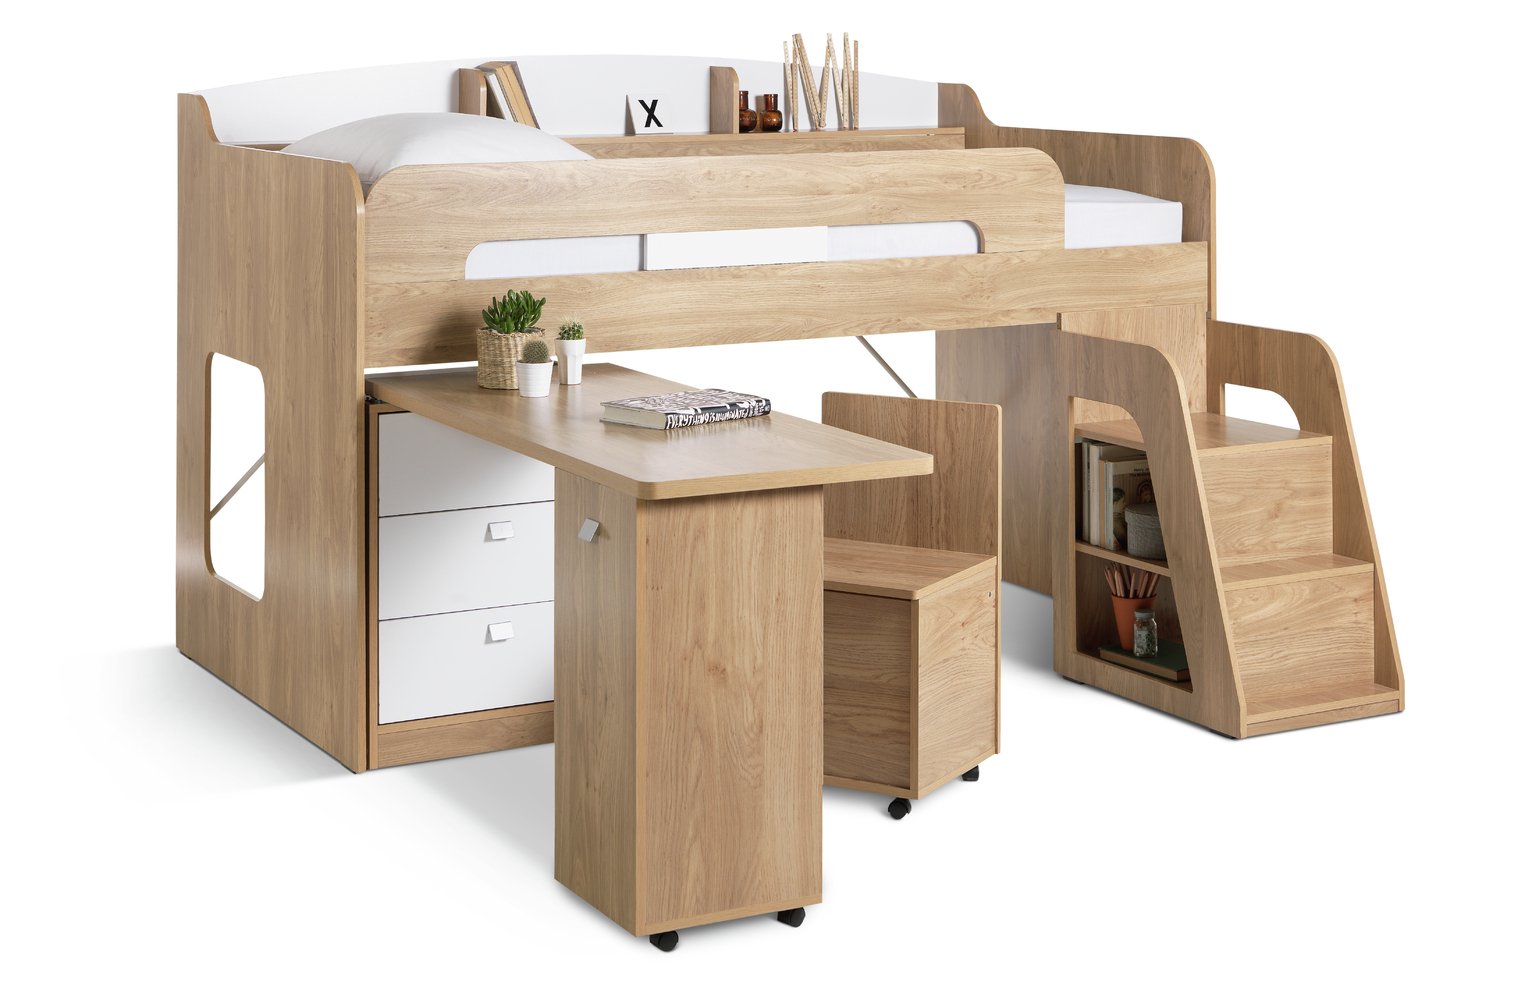 mid cabin bed with storage